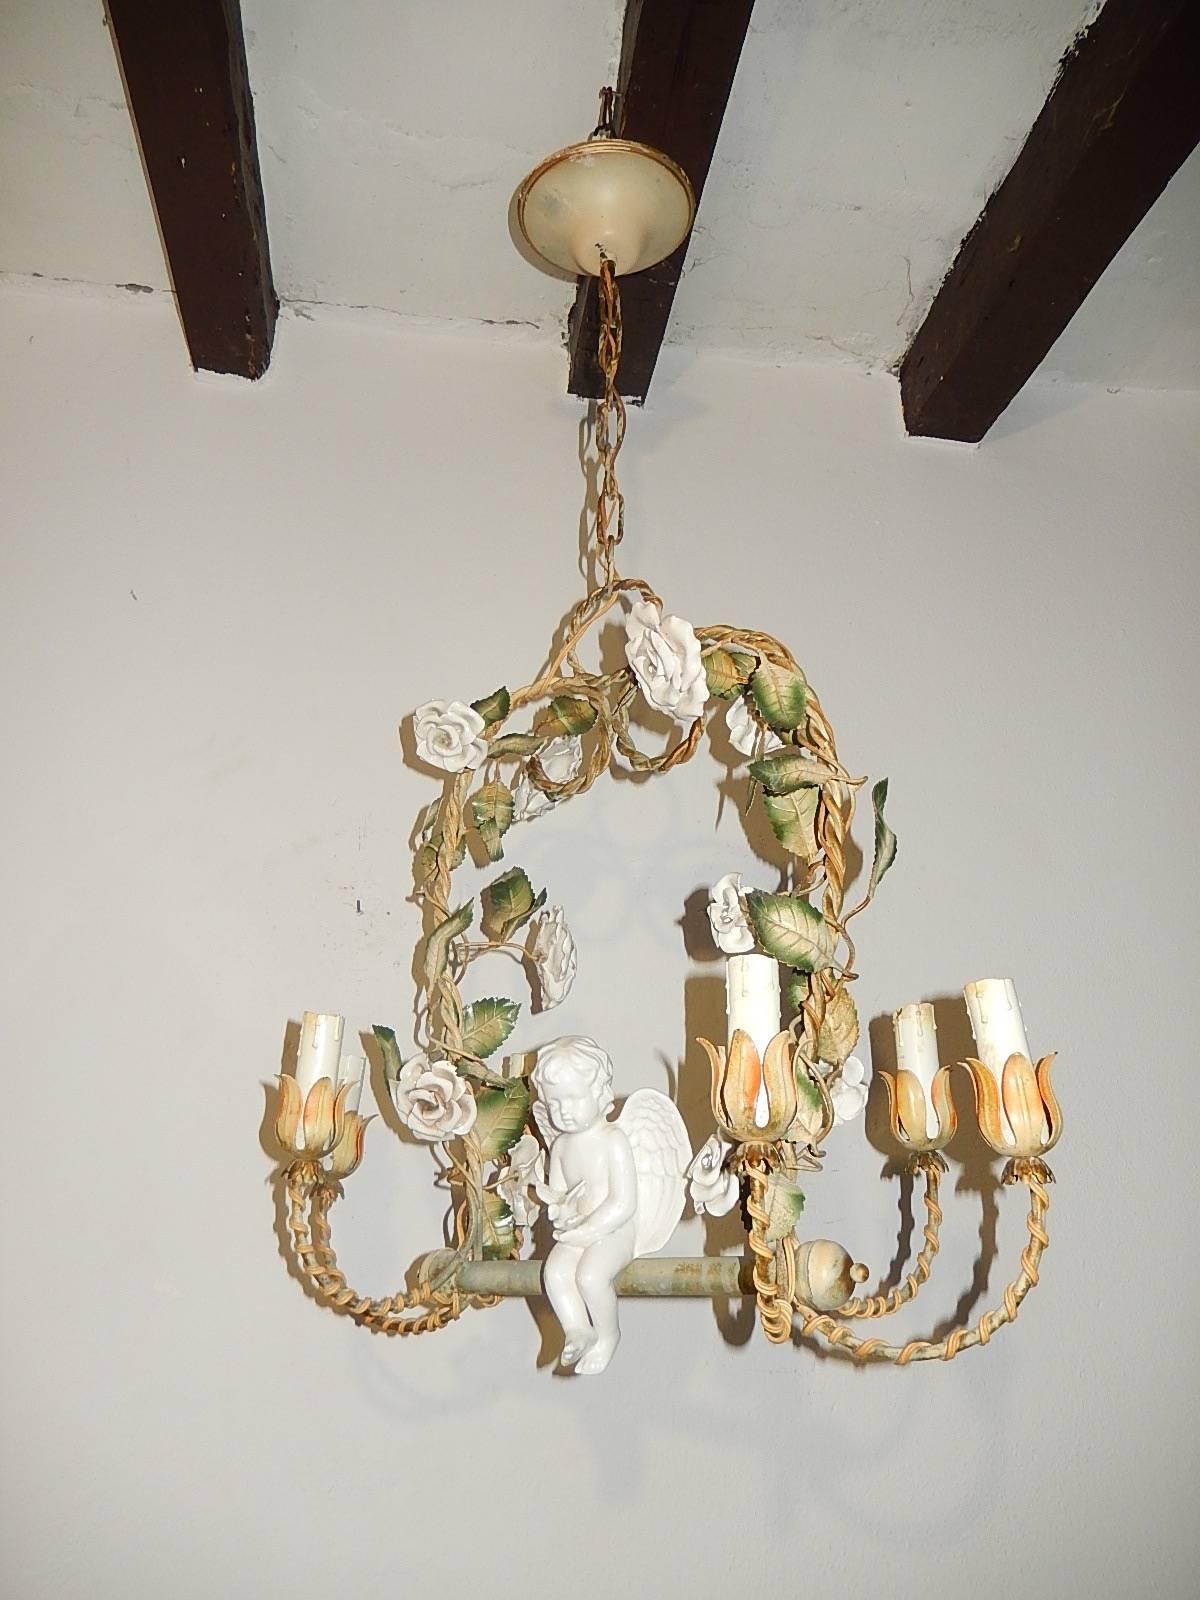 Housing 6 lights. Handmade porcelain roses on original tole. Winged cherub is 7.5 inches tall. Original chain and canopy adds 16 inches. Re-wired and ready to hang. Free priority shipping from Italy.